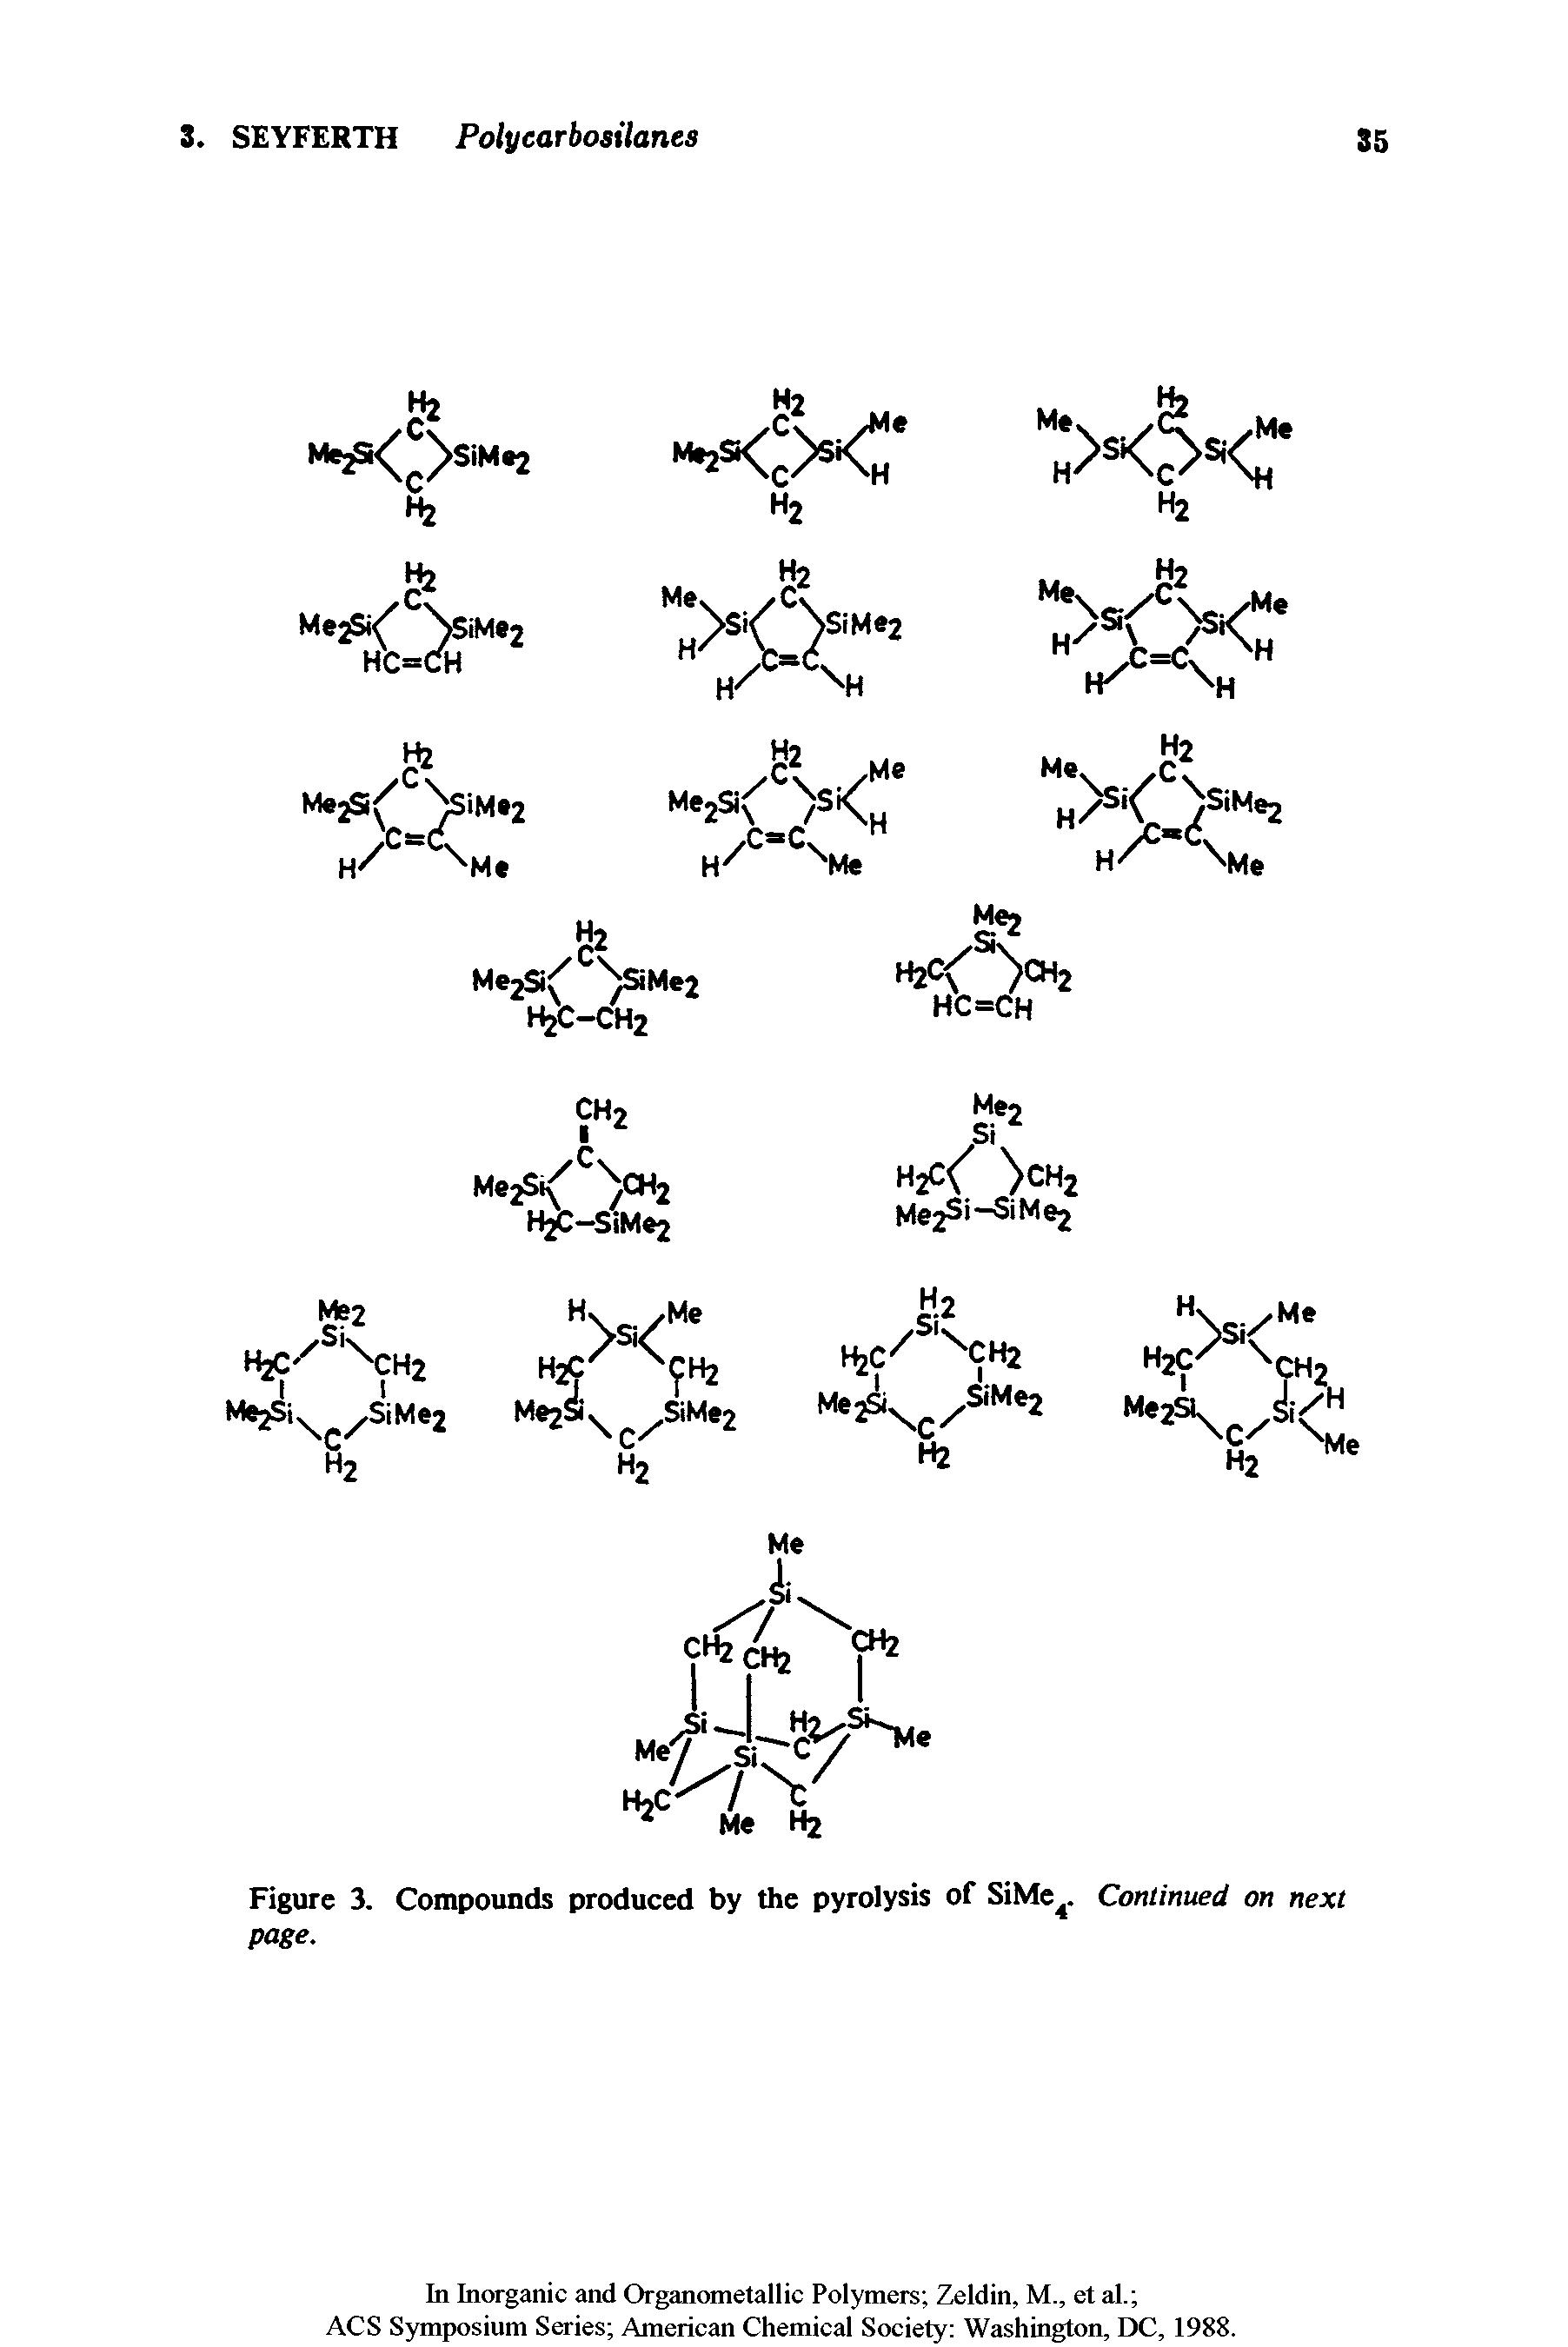 Figure 3. Compounds produced by the pyrolysis of SiMe4- Continued on next page.